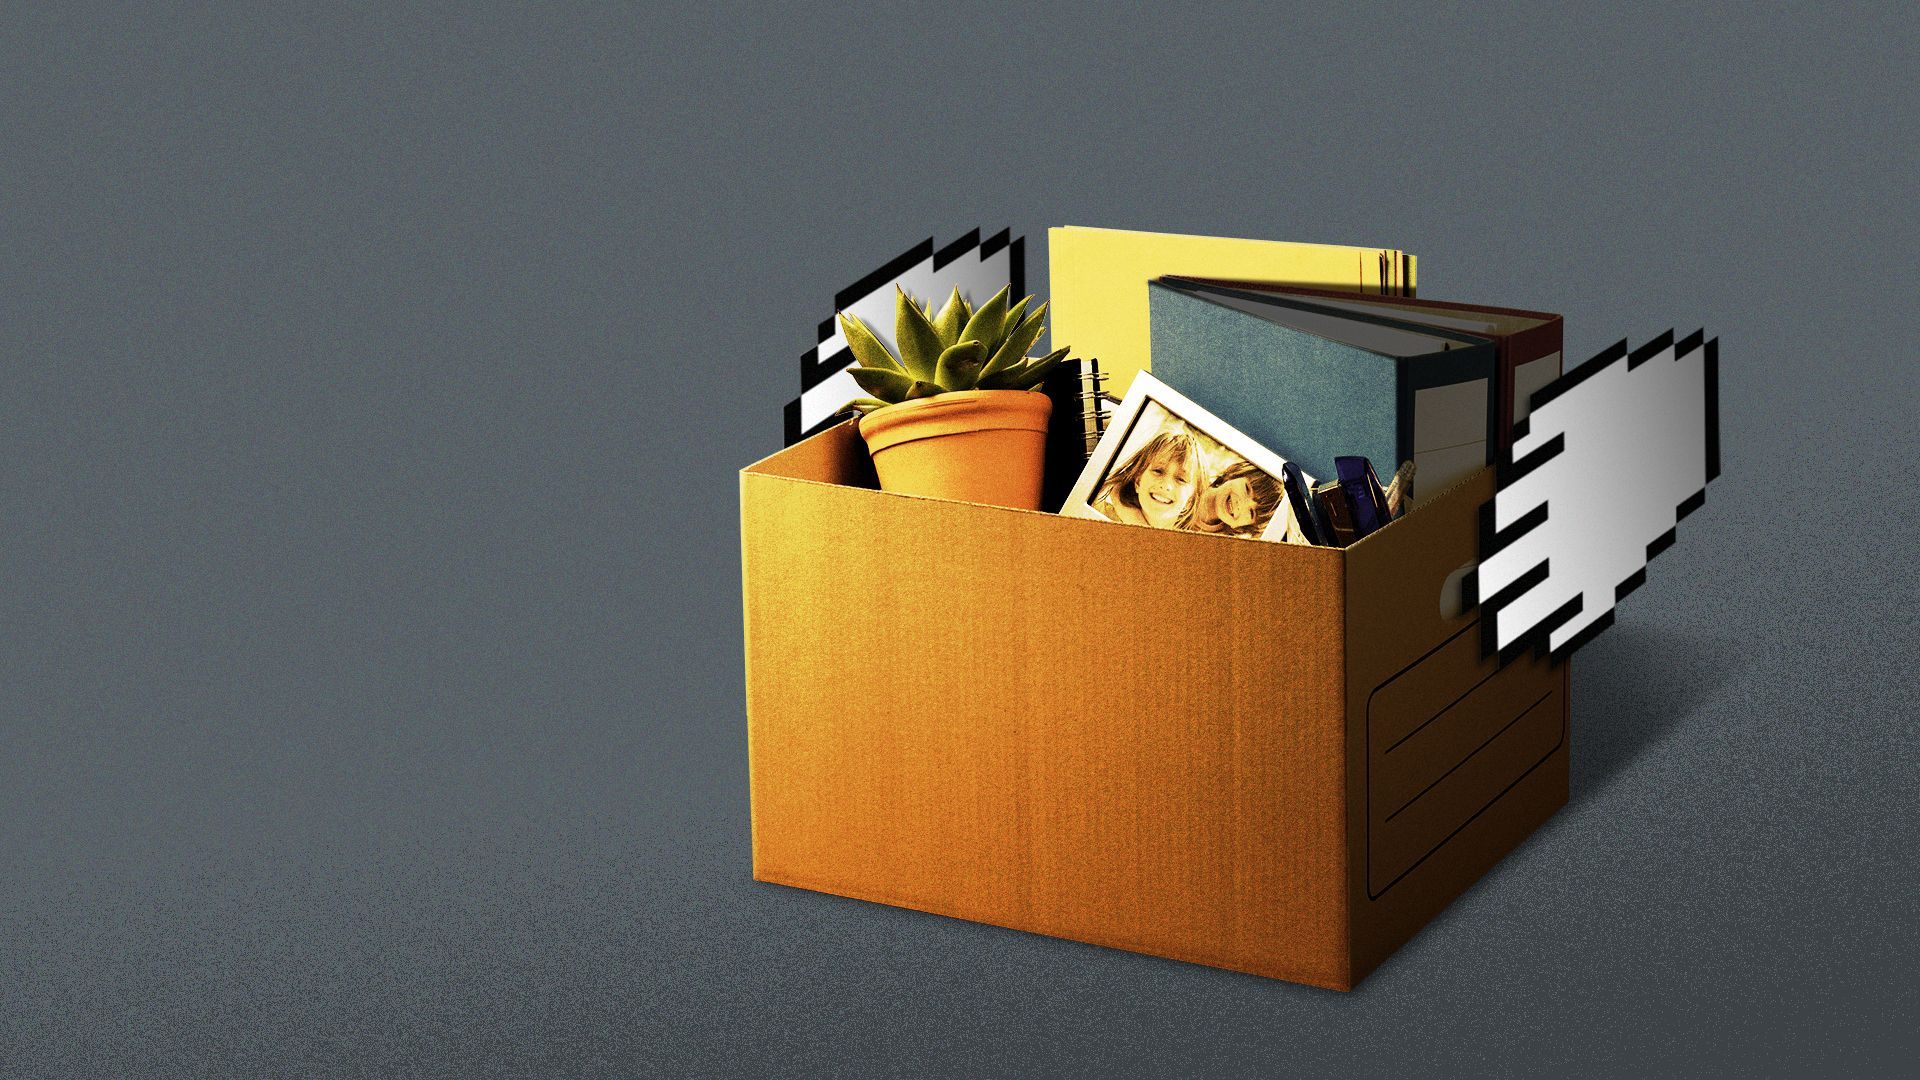 Illustration of two cursor hands holding a box full of office supplies.